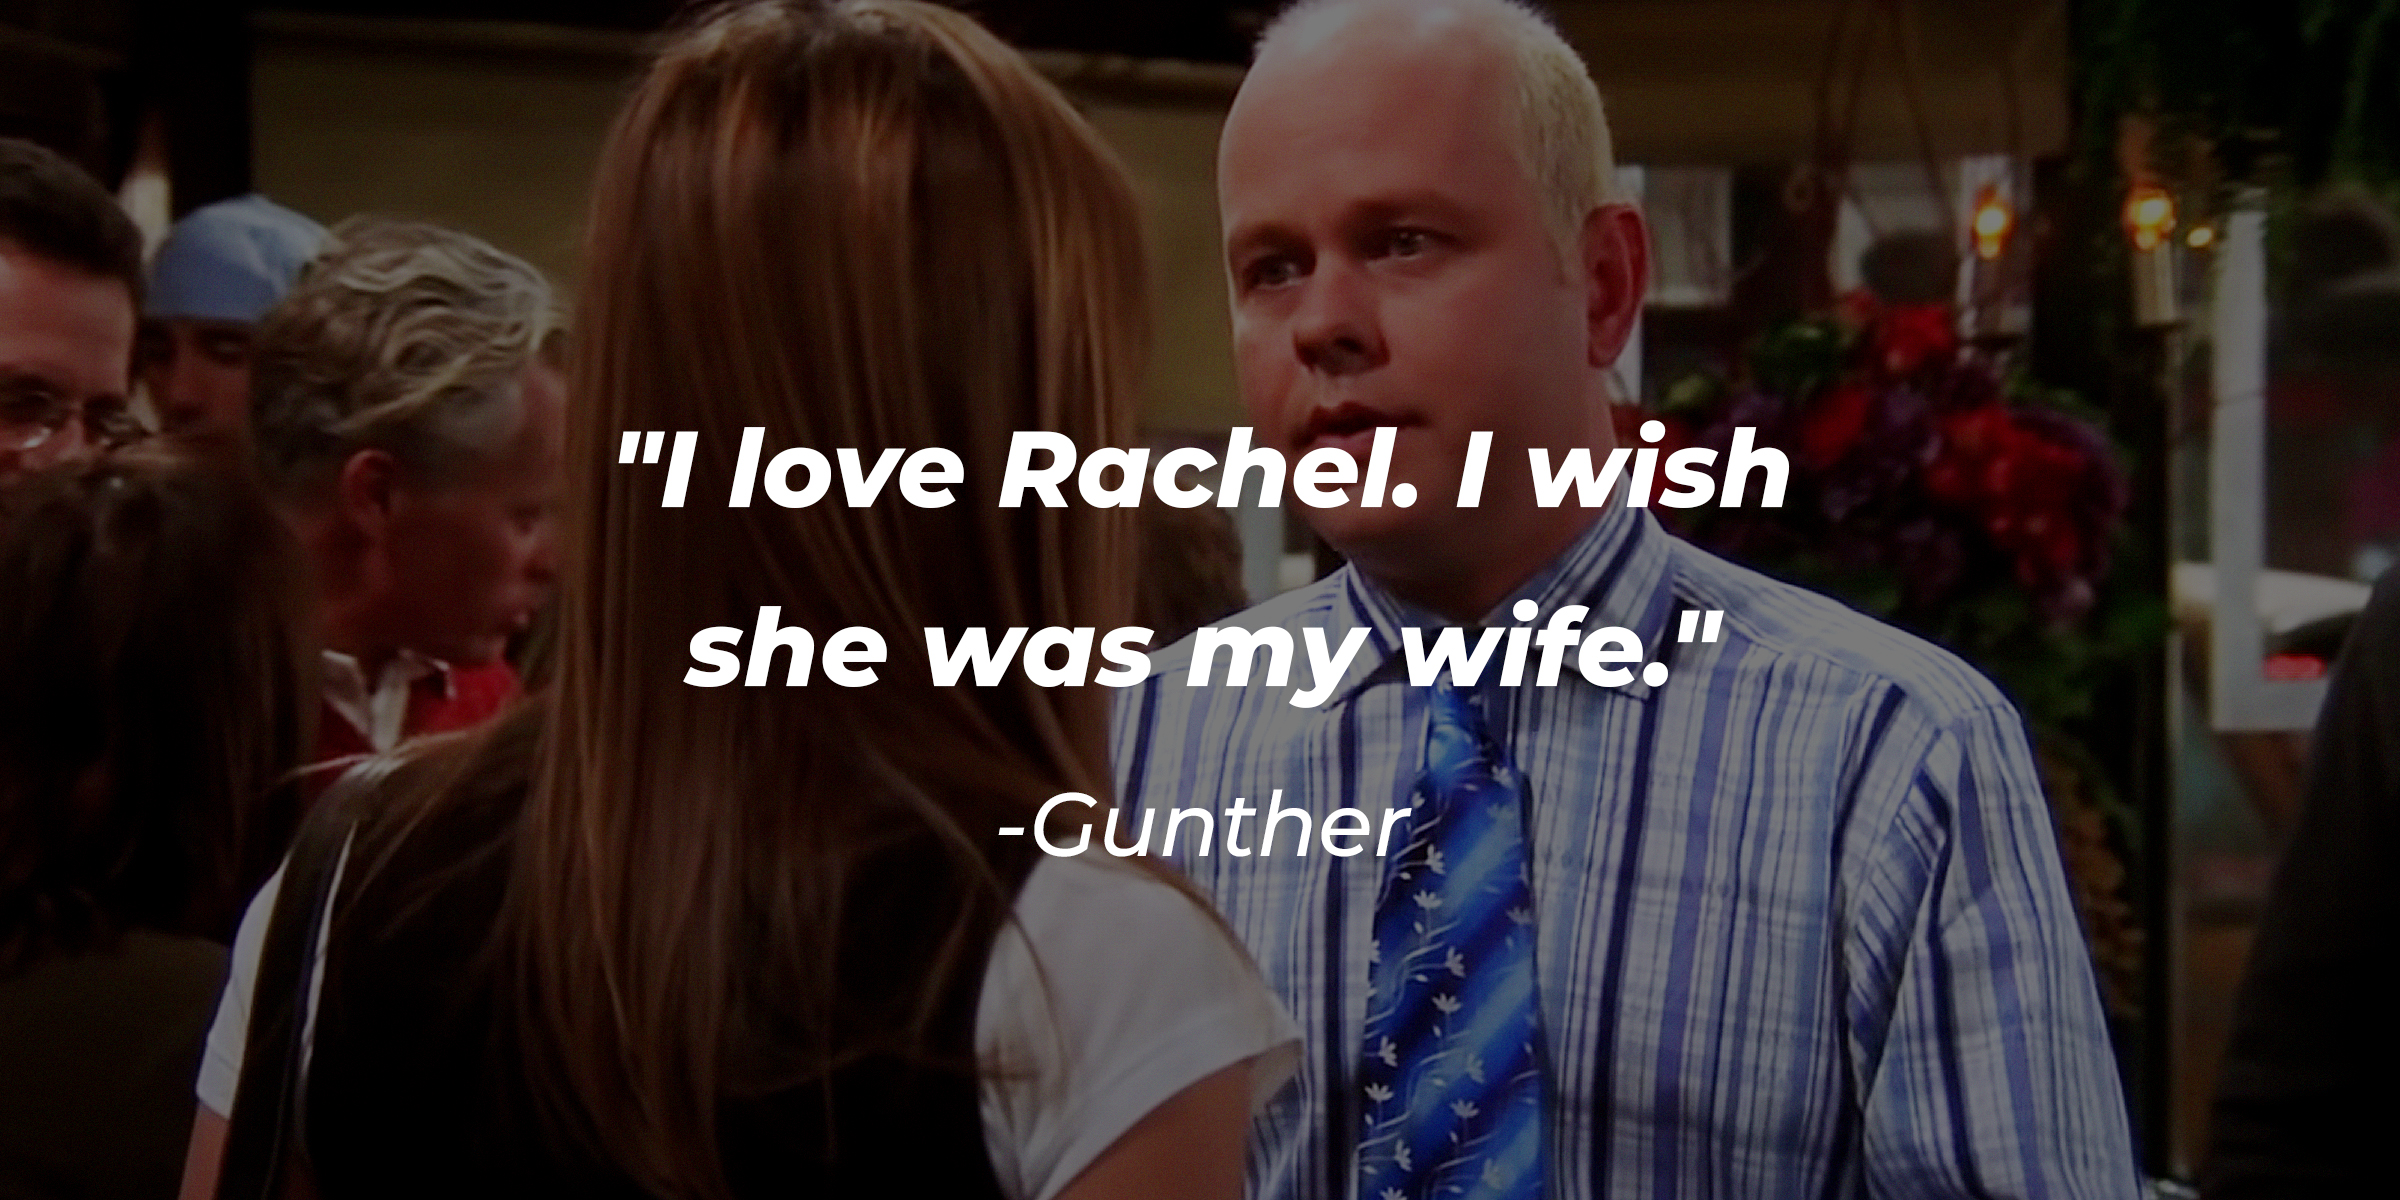 An image of Gunther talking to Rachel, with his quote: “I love Rachel. I wish she was my wife." | Source: Youtube.com/Friends